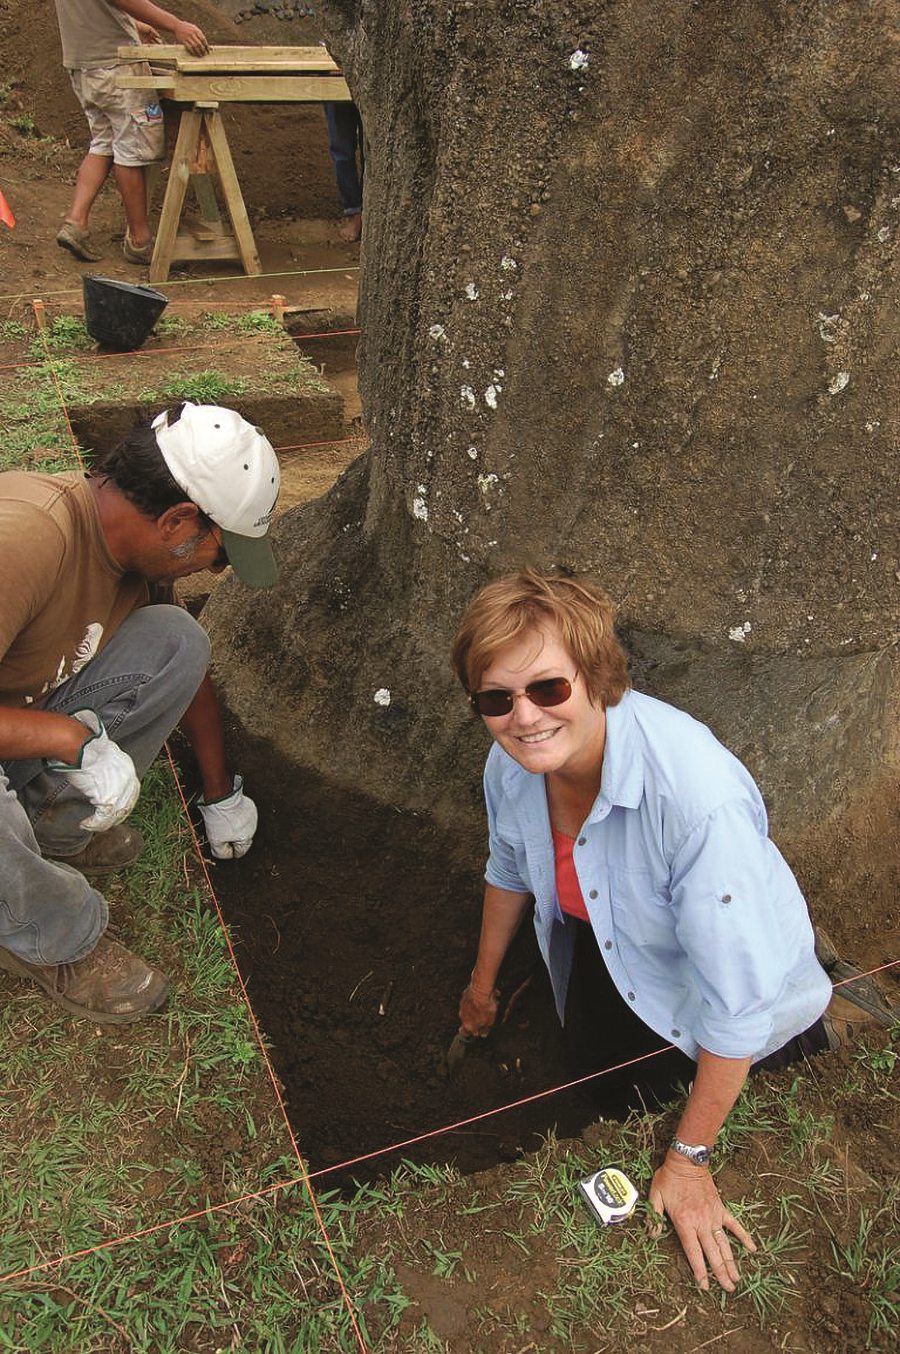 Jo Anne Van Tilburg (right) and Christián Arevalo Pakarati, one of the project’s codirectors, digging around a statue